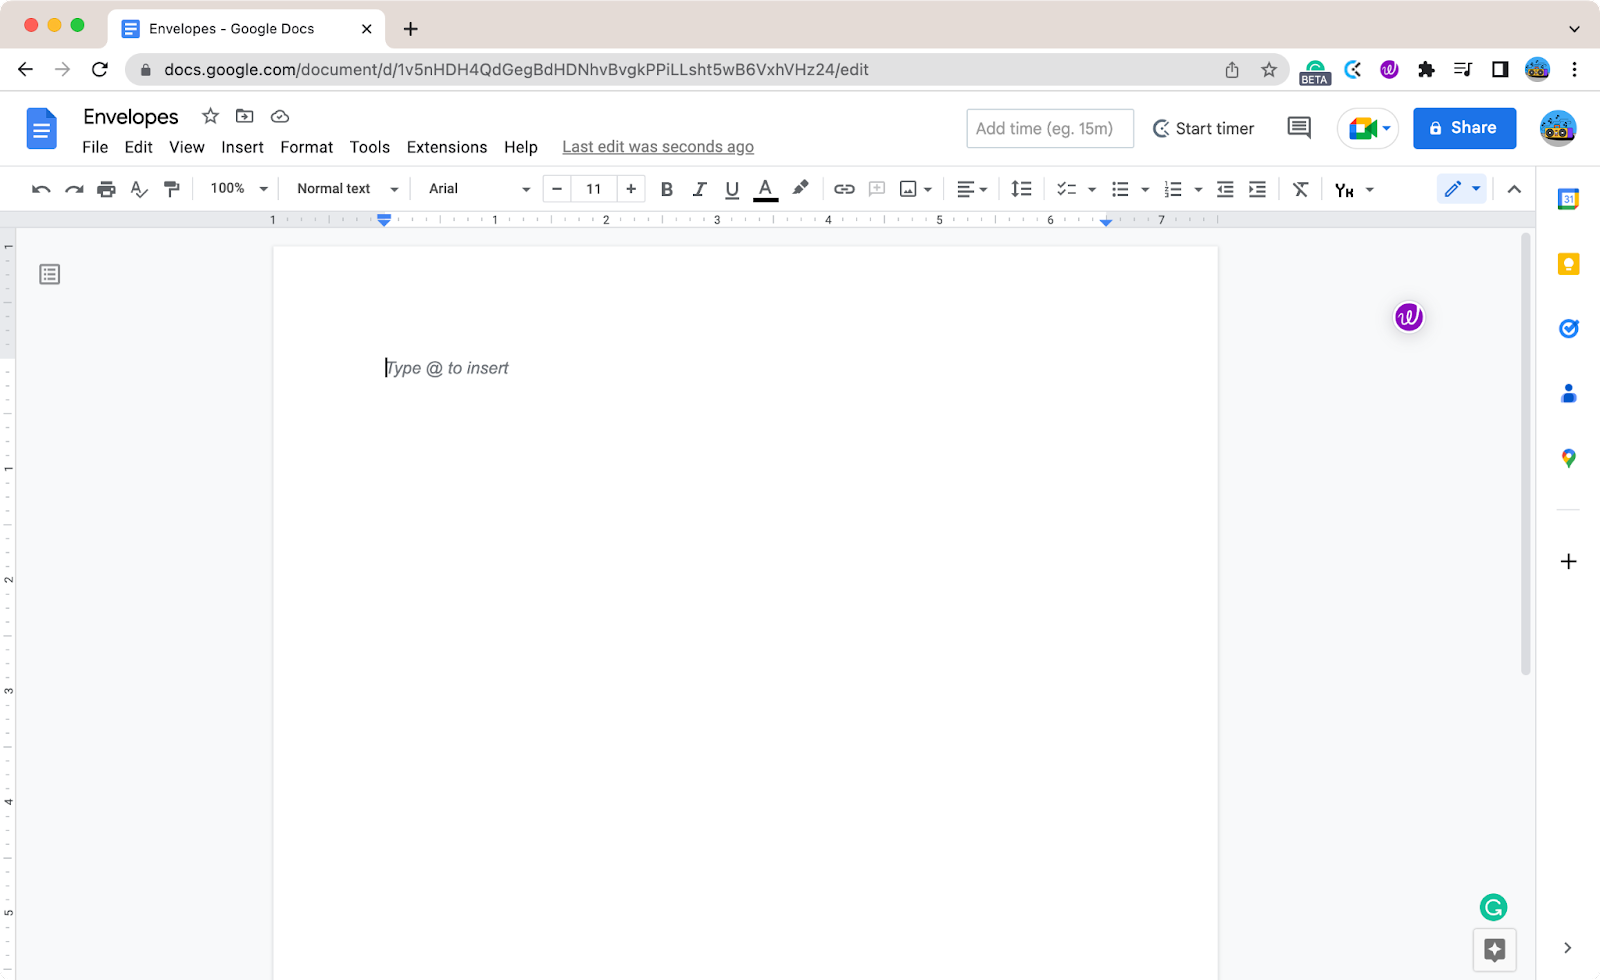 how-to-print-customized-envelopes-with-a-logotype-in-google-docs